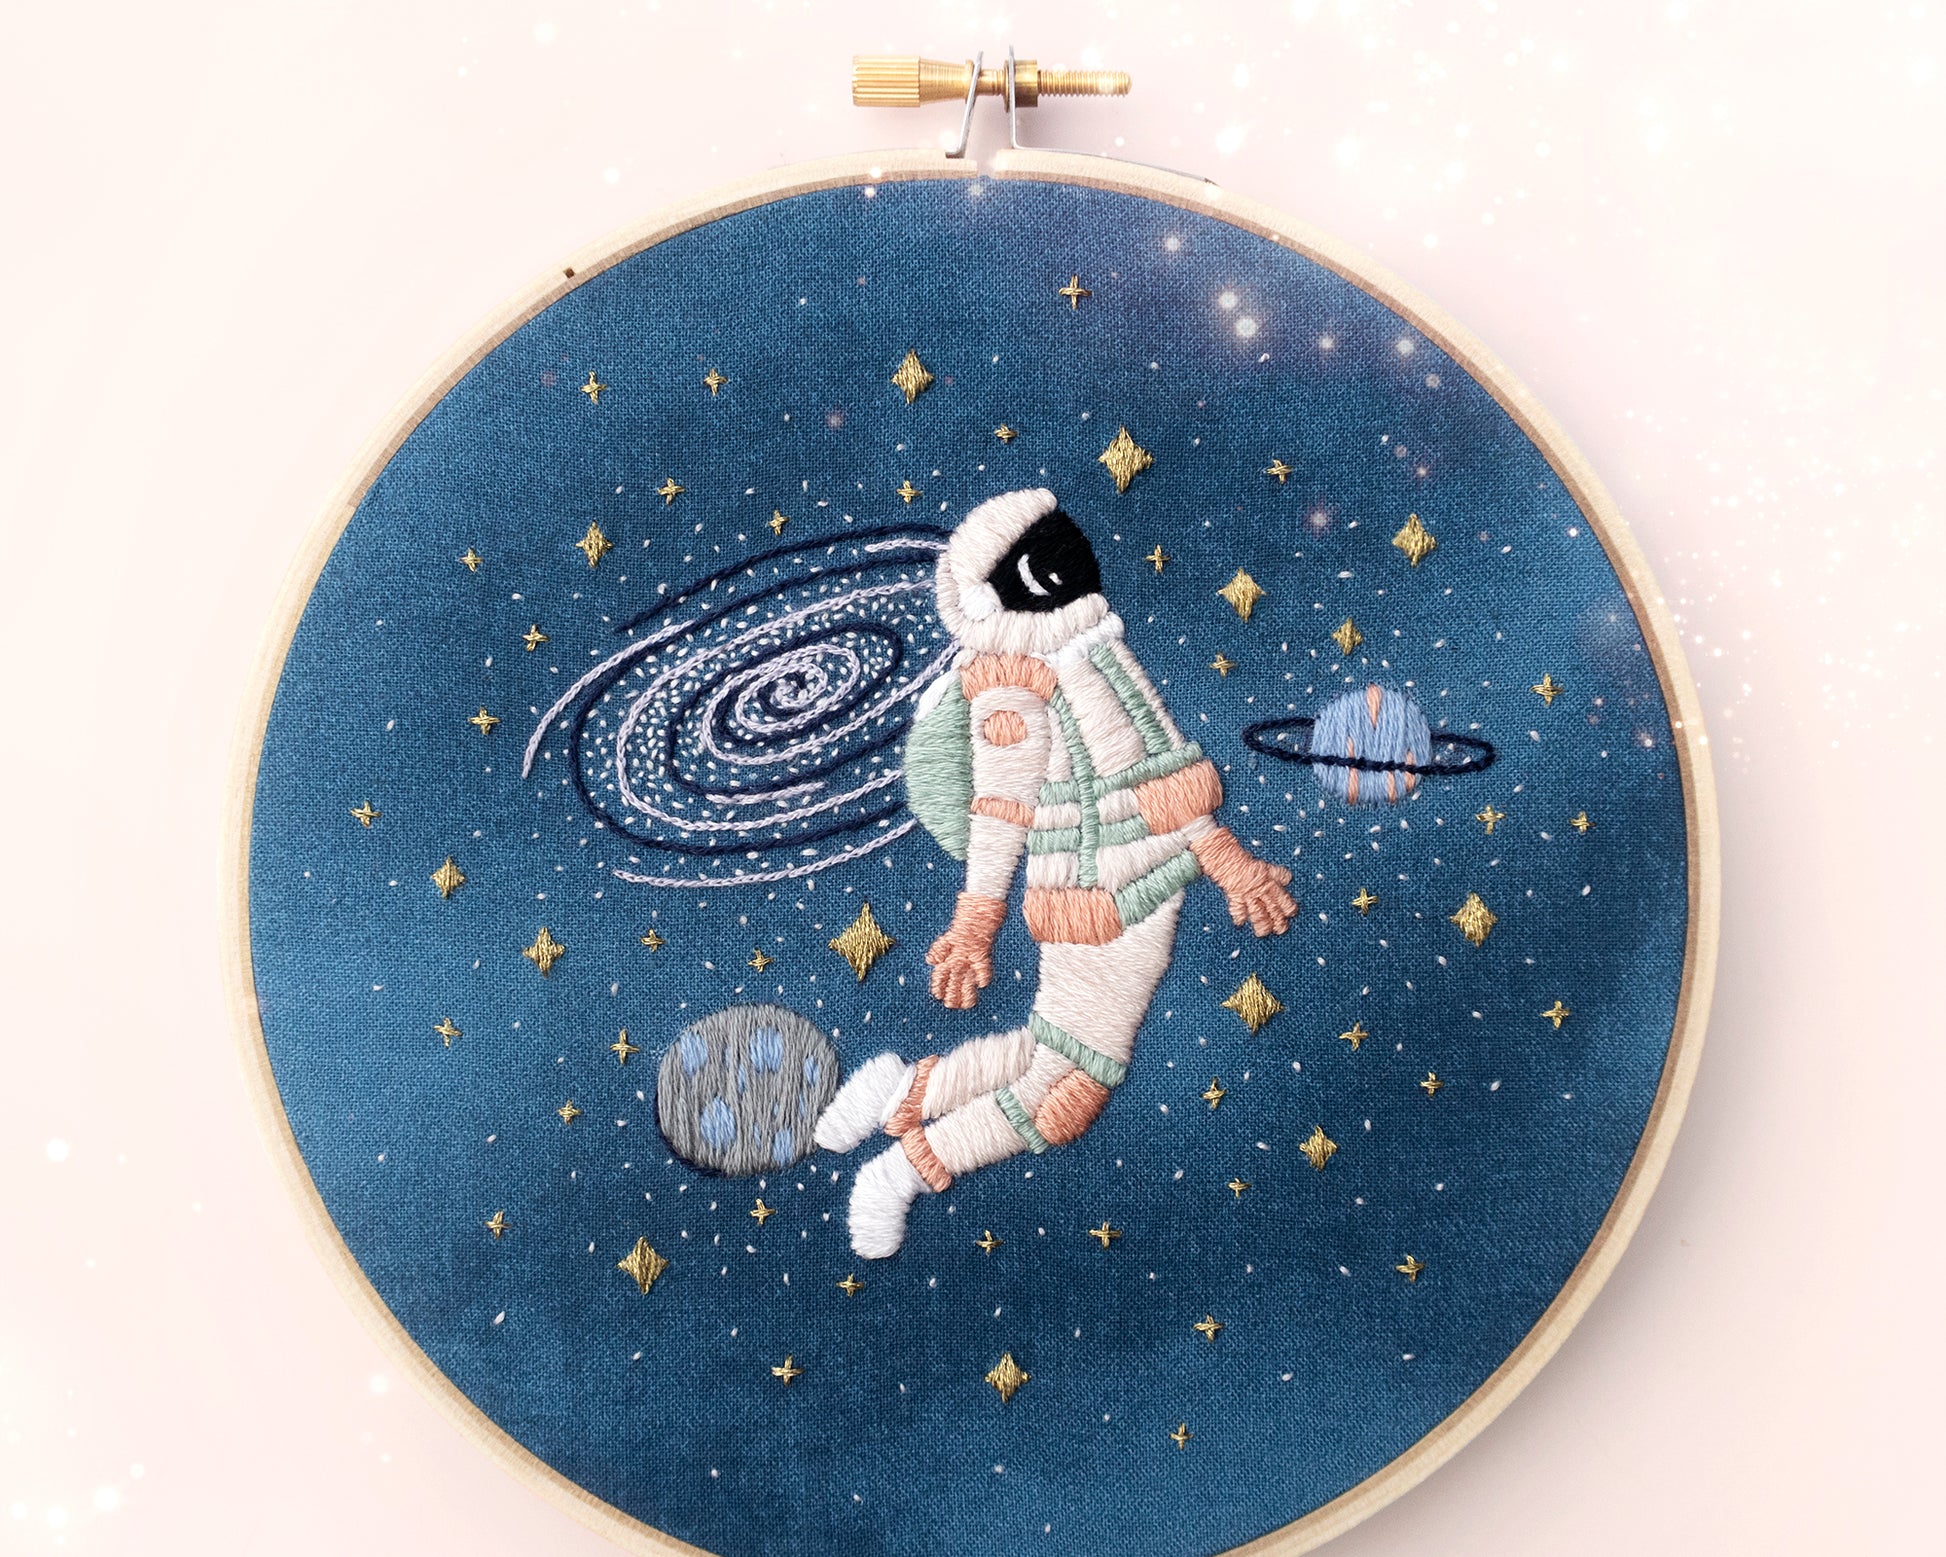 The Curious Astronaut Embroidery Pattern sparkly details